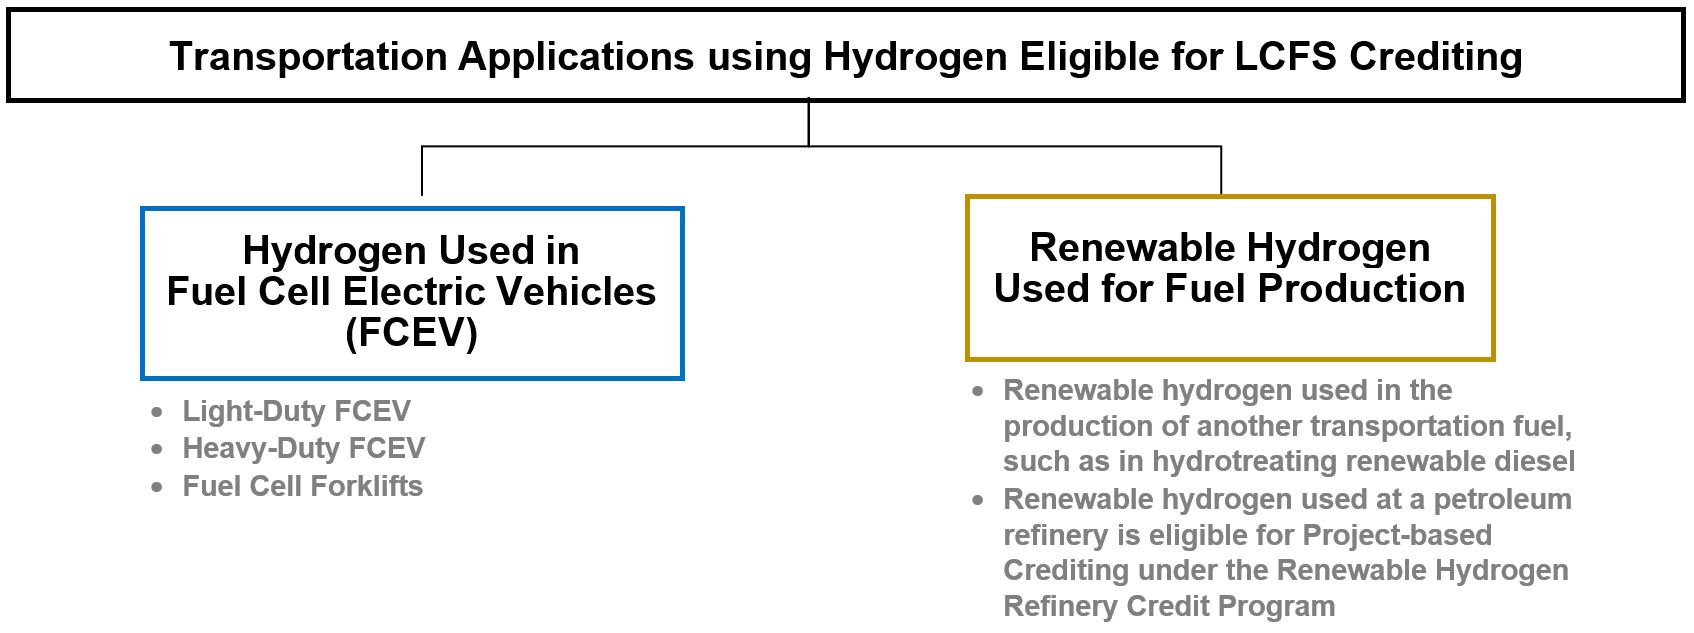 Transportation Applications using Hydrogen Eligible for LCFS Crediting